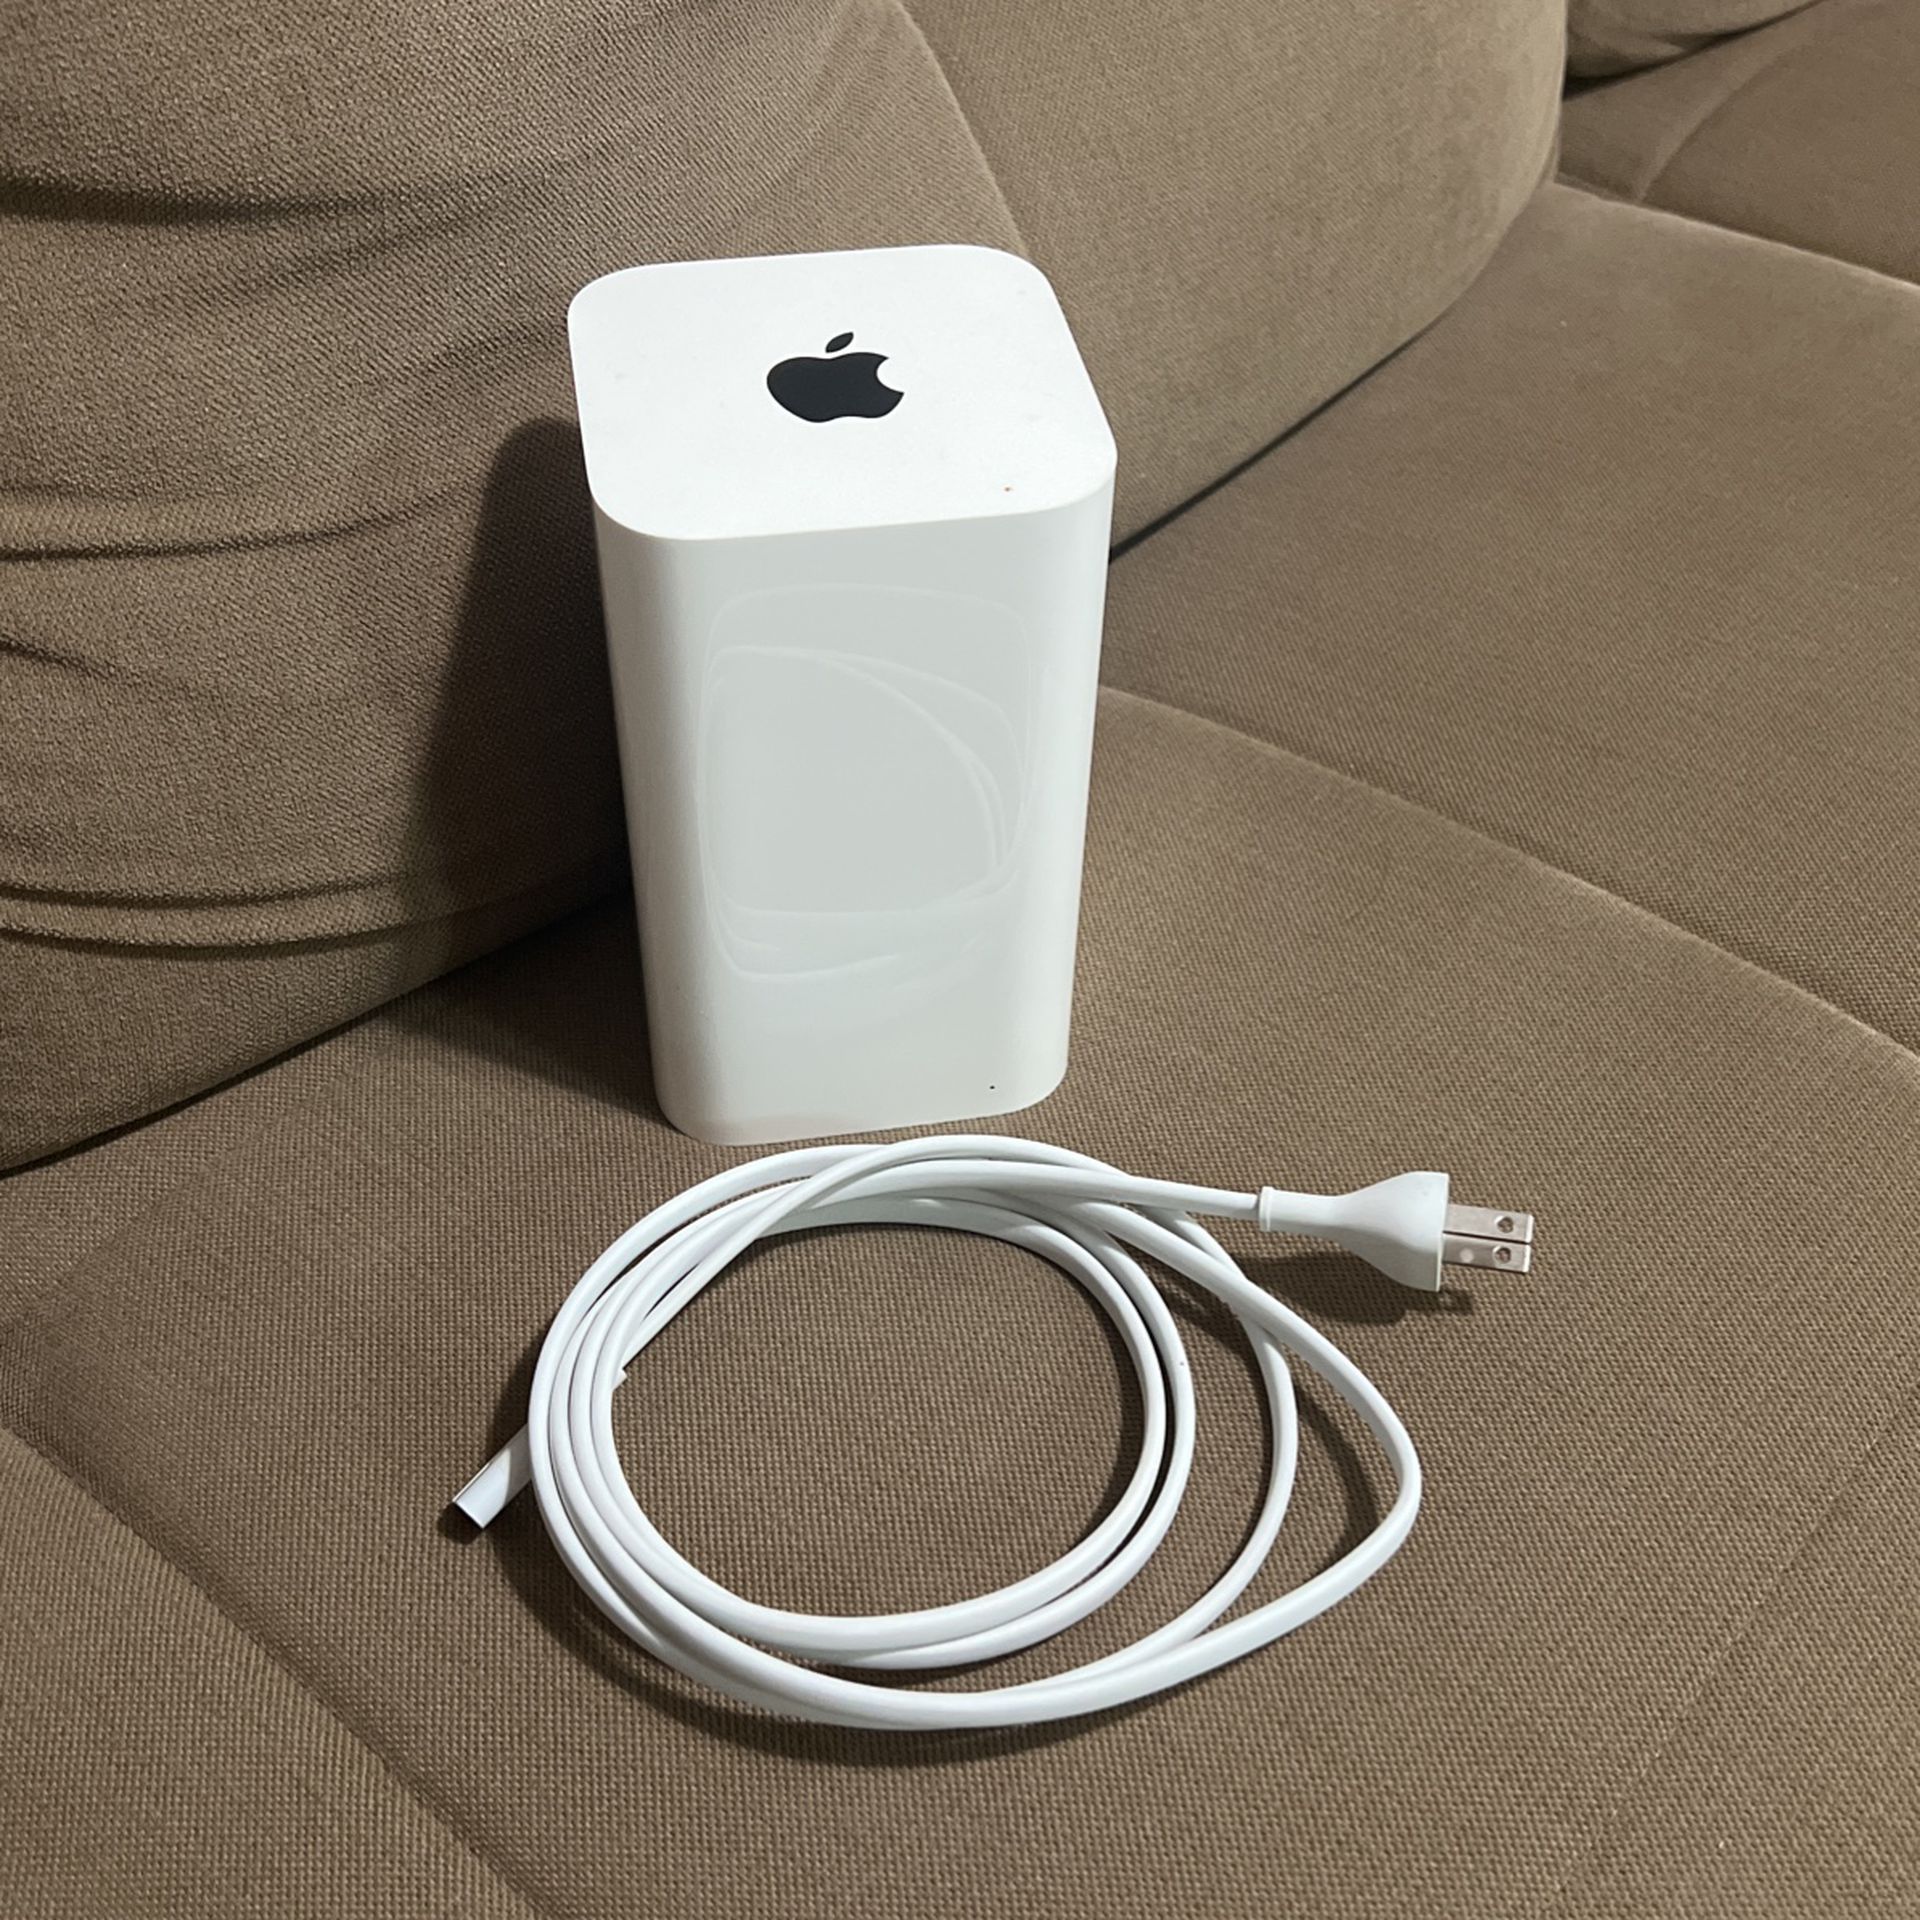 Apple AirPort Extreme Base Station Model A1521 EMC 2703 WiFi Router White w/cord